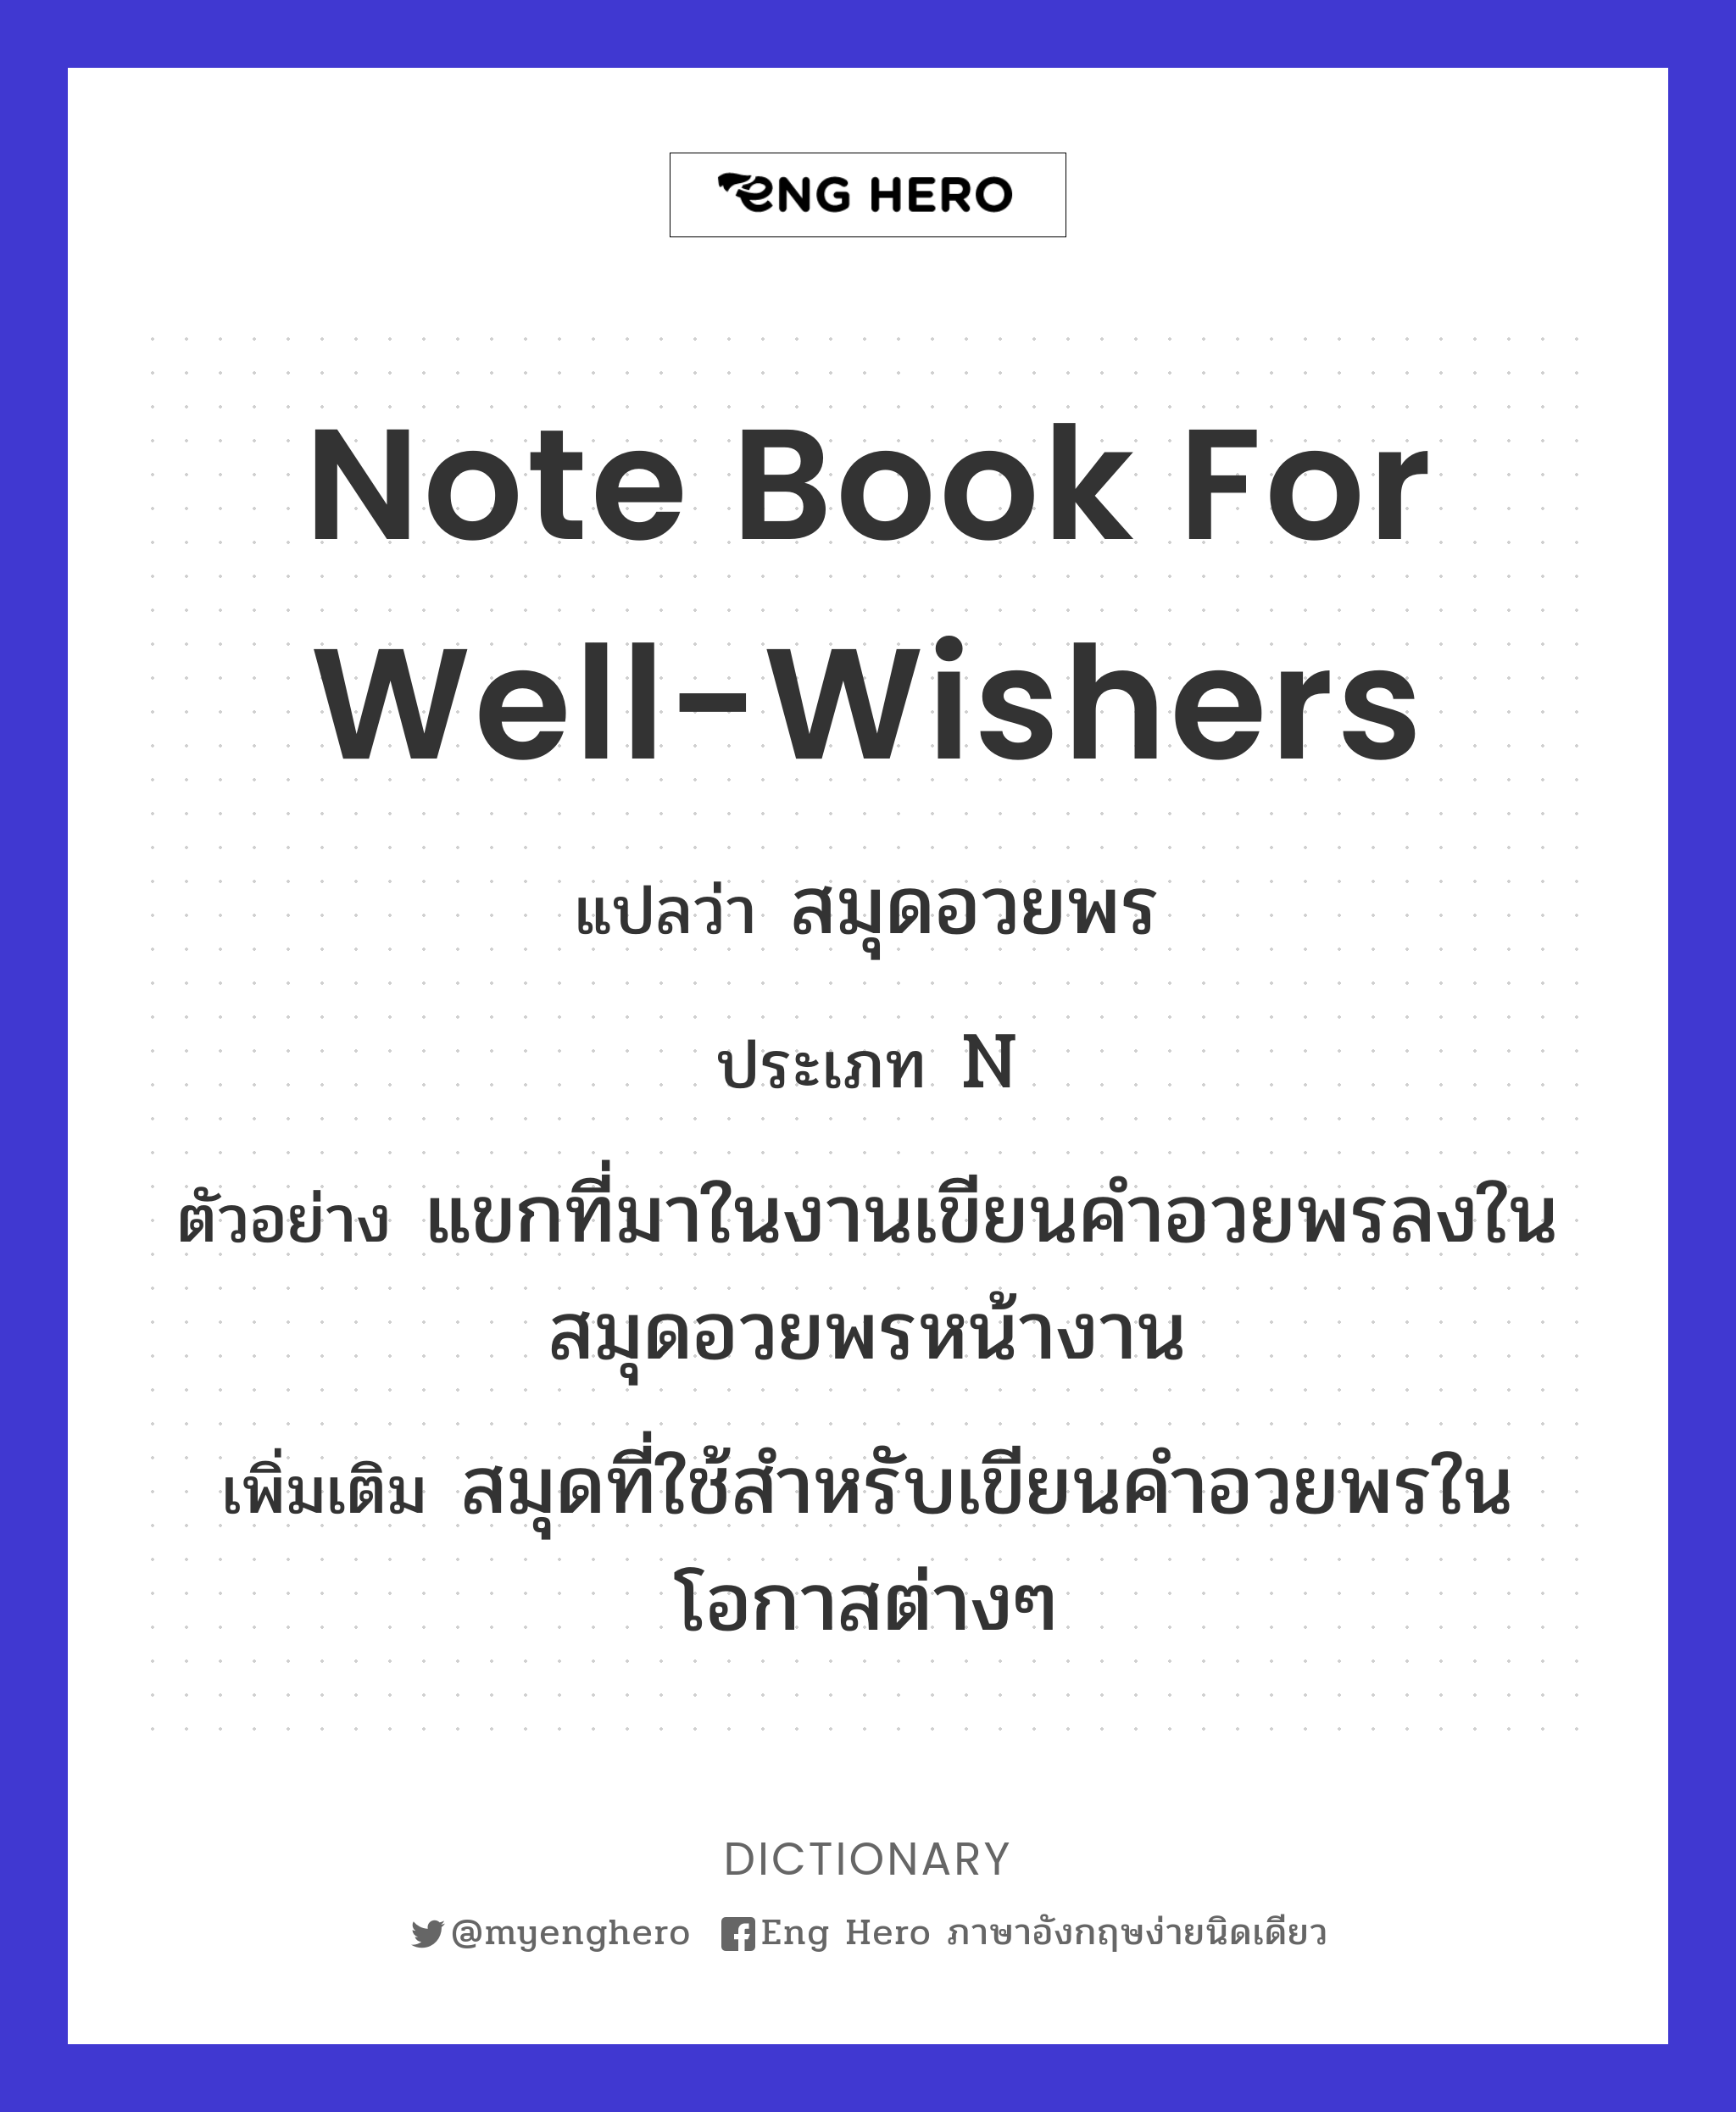 note book for well-wishers